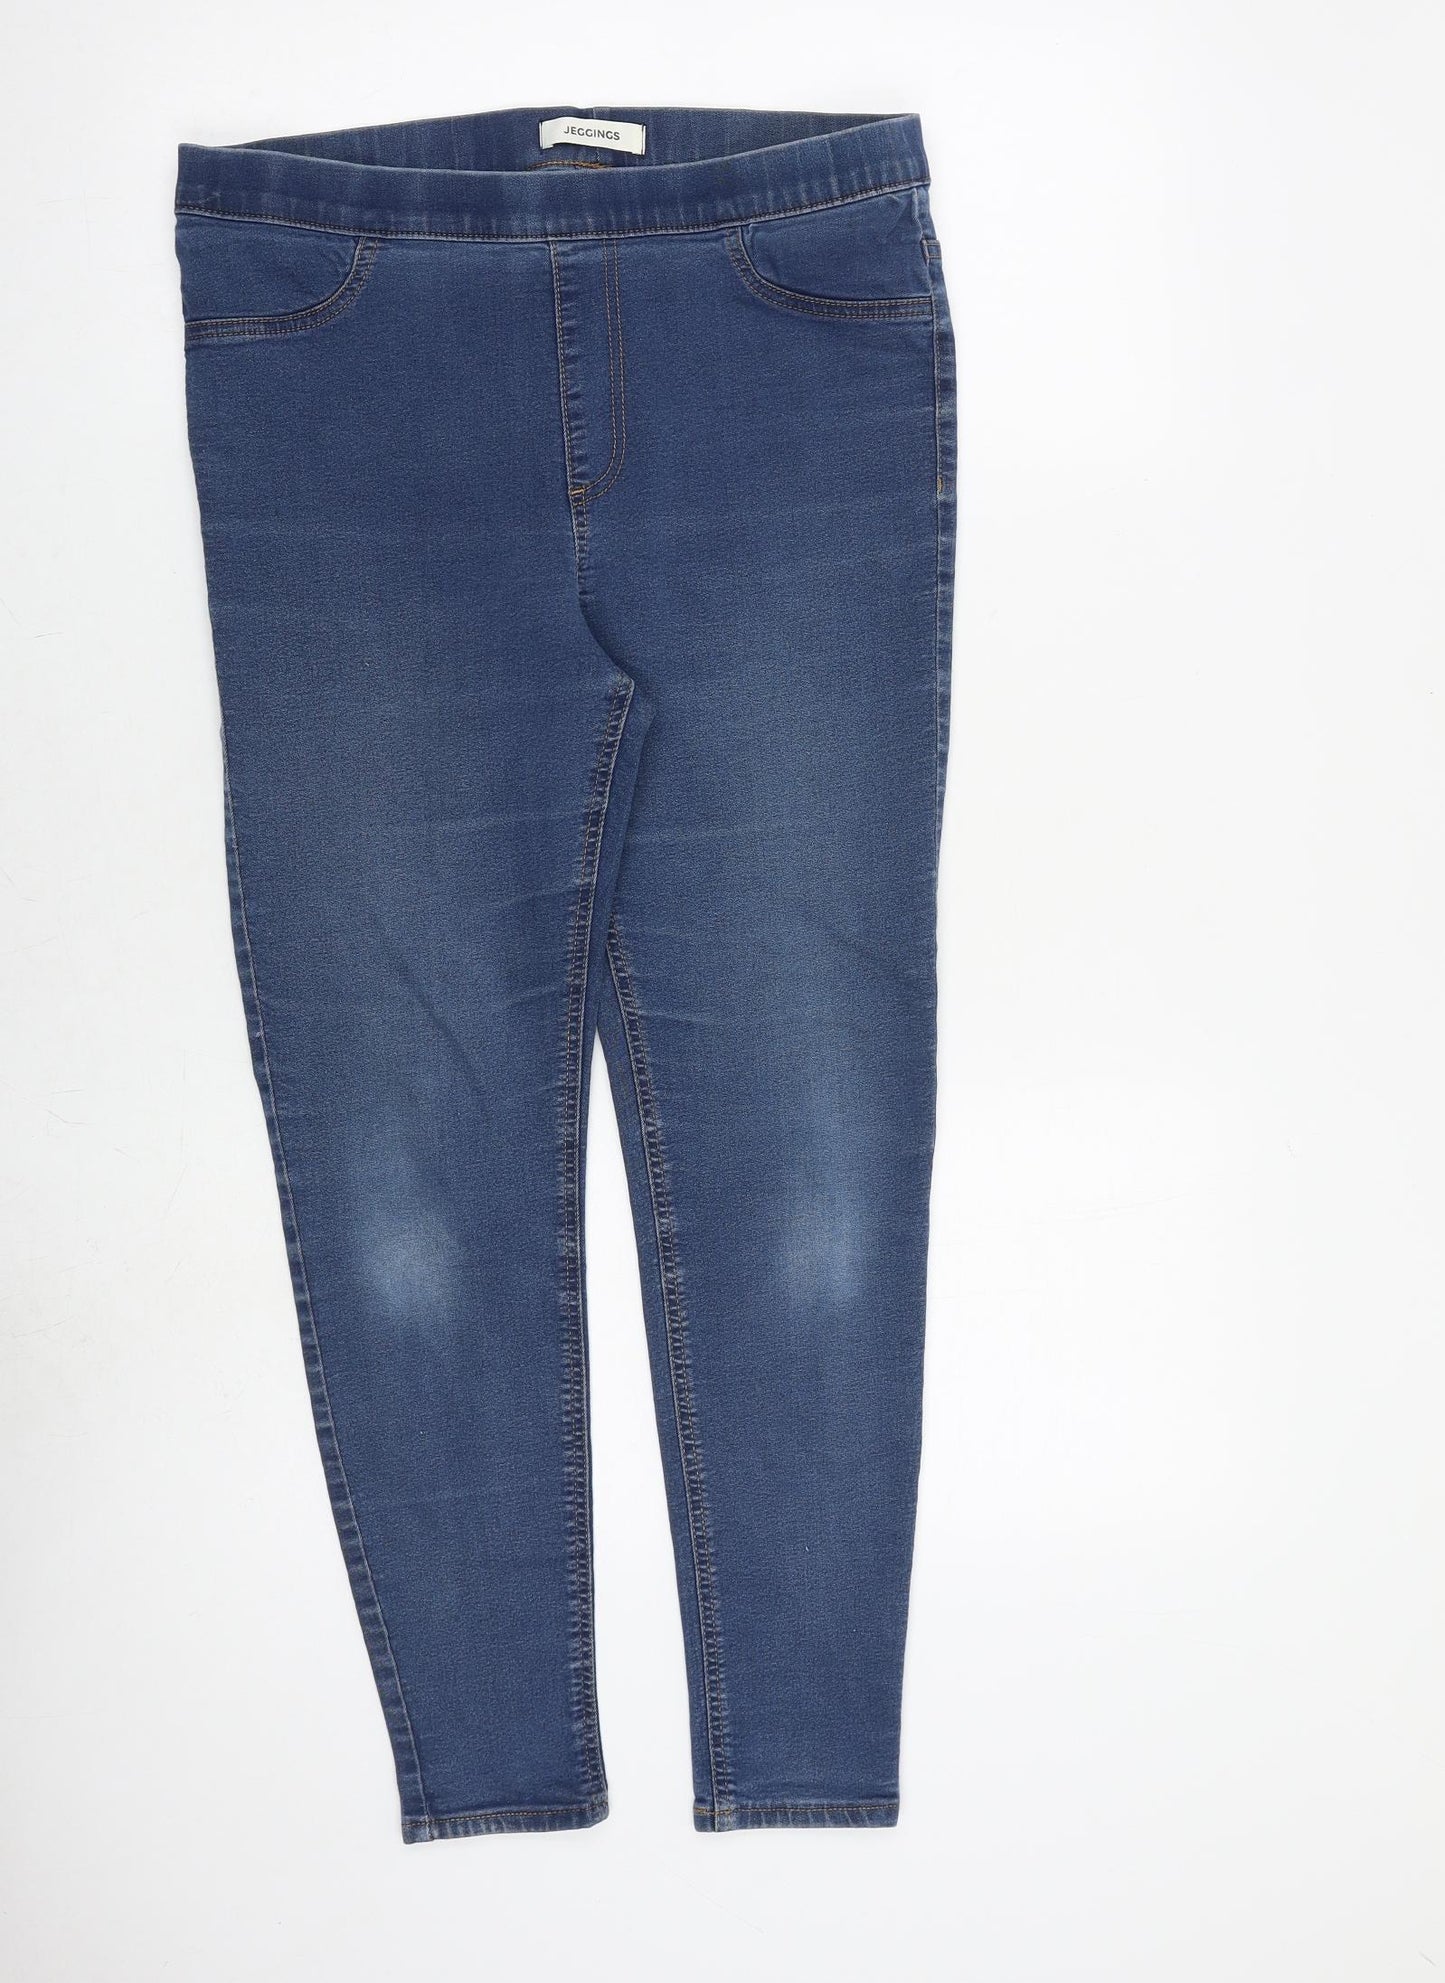 Marks and Spencer Womens Blue Cotton Jegging Jeans Size 14 L28 in Regular